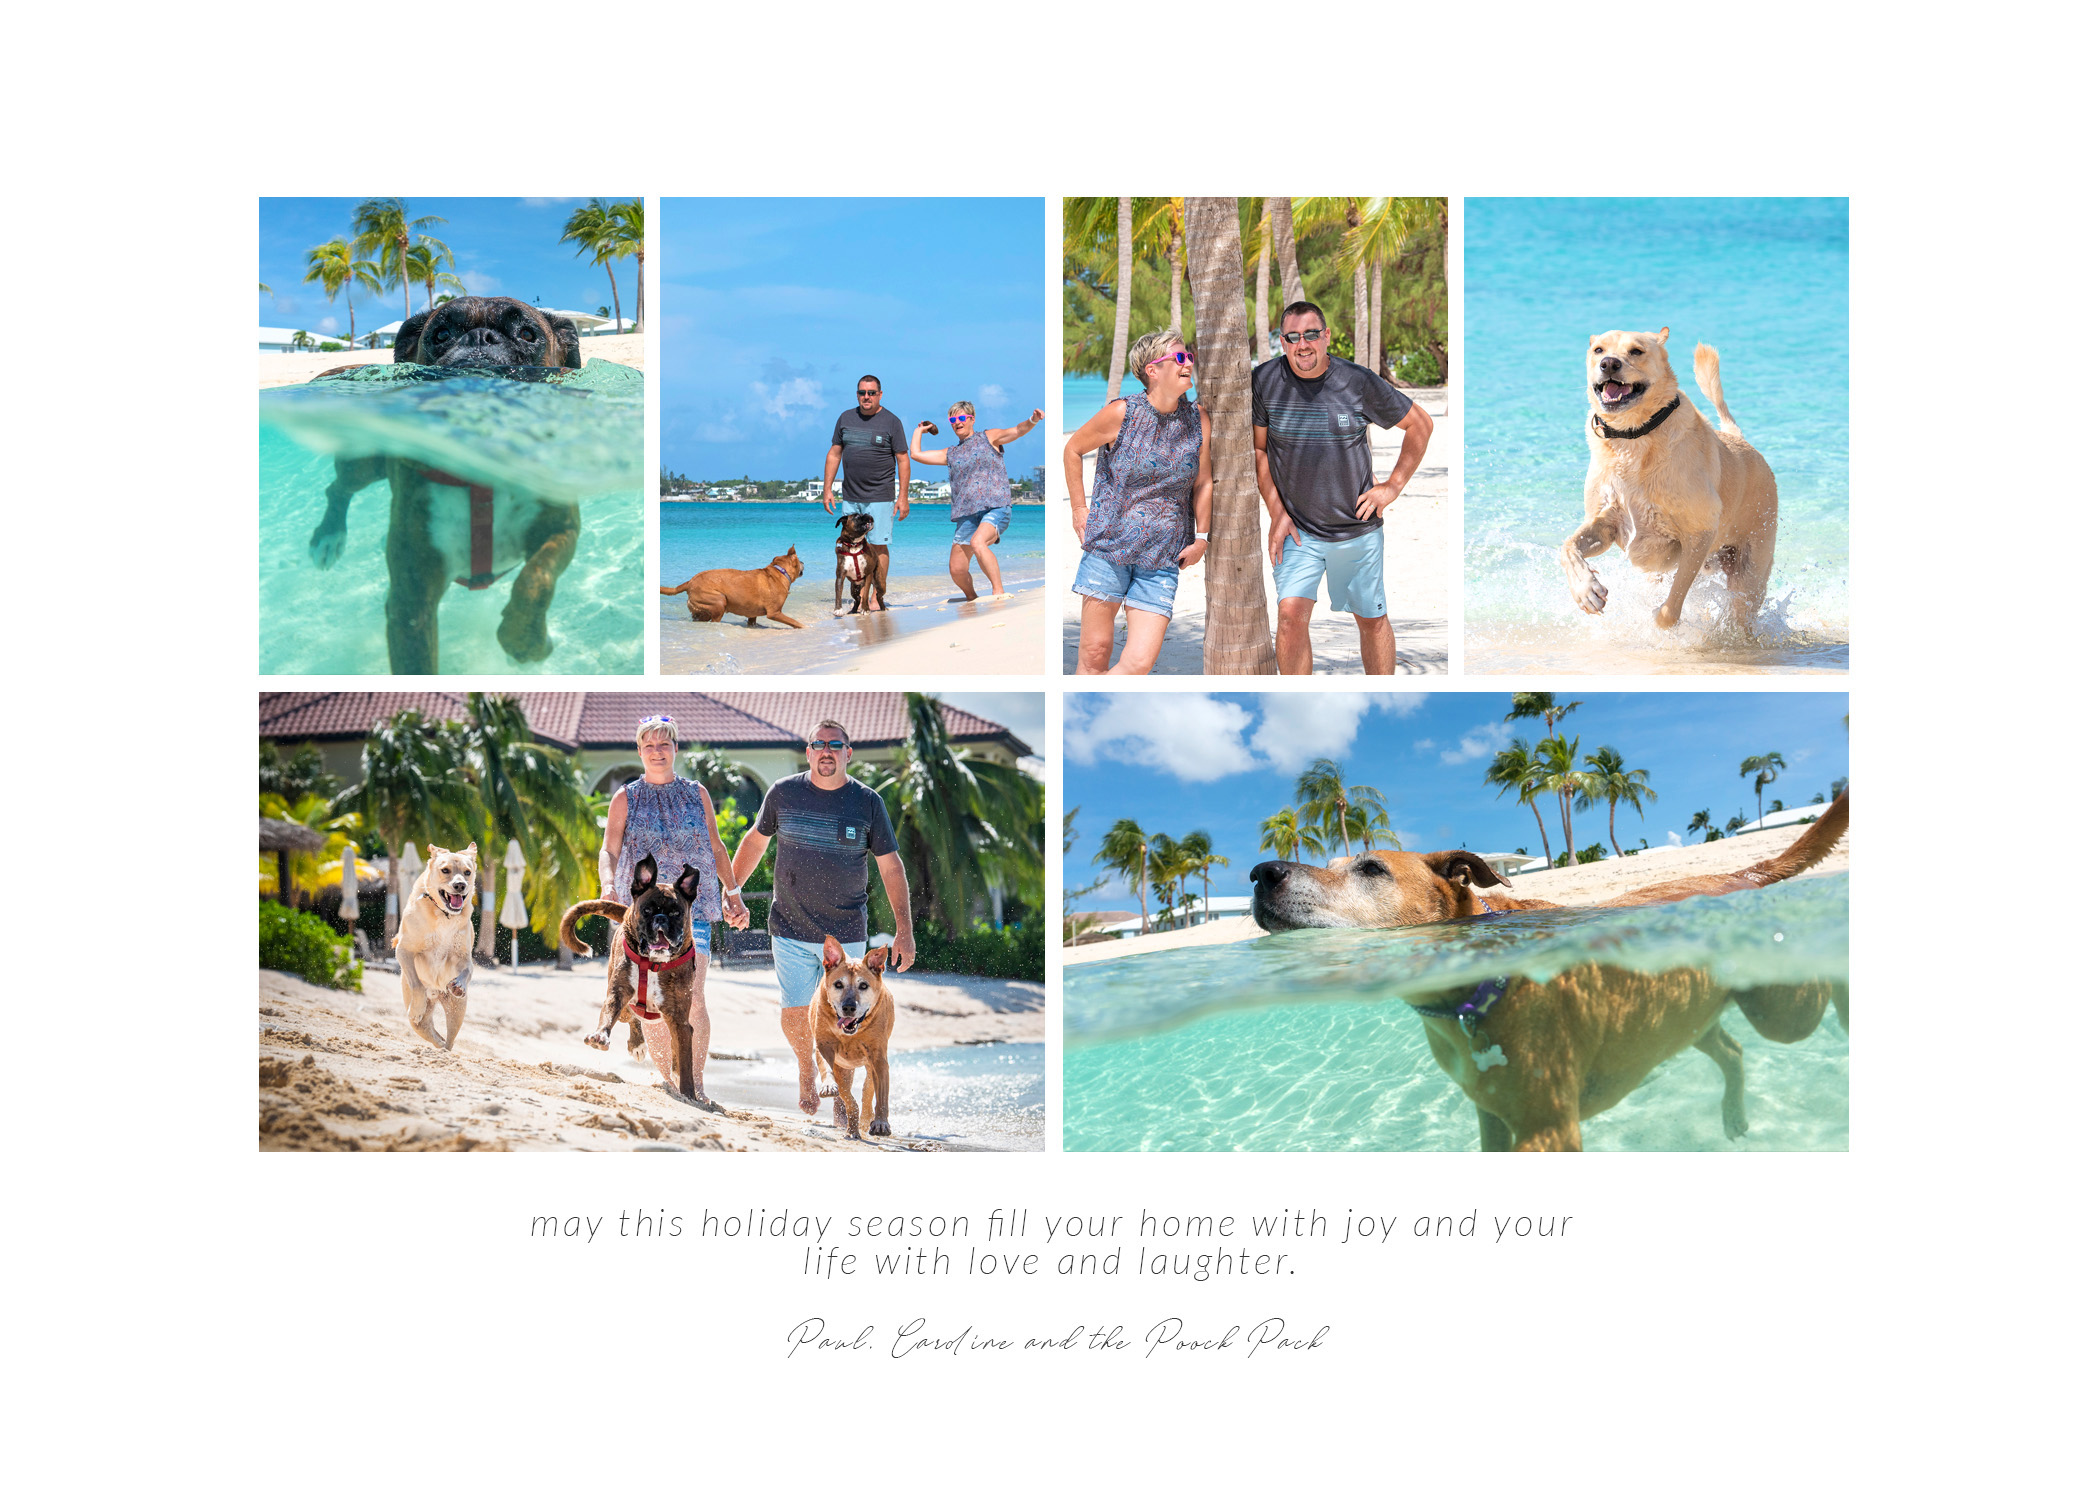 grandcaymanphotographer,caymanislandsphotography,familyportraits,visitcaymanislands,caymanislands,grandcayman,grandcaymanphotographer,caymanweddingphotographer,weddingphotographer,portraitphotographer,caymanportraitphotographer,caymanislandsphotographer,caribbean,dogs,capturingthemoment,dogportraits,petportraits,swimmingdogs,swimming,rescuedog,beachdog,underwaterphotography,picturethisstudios,heatherholtphotography,christmascards